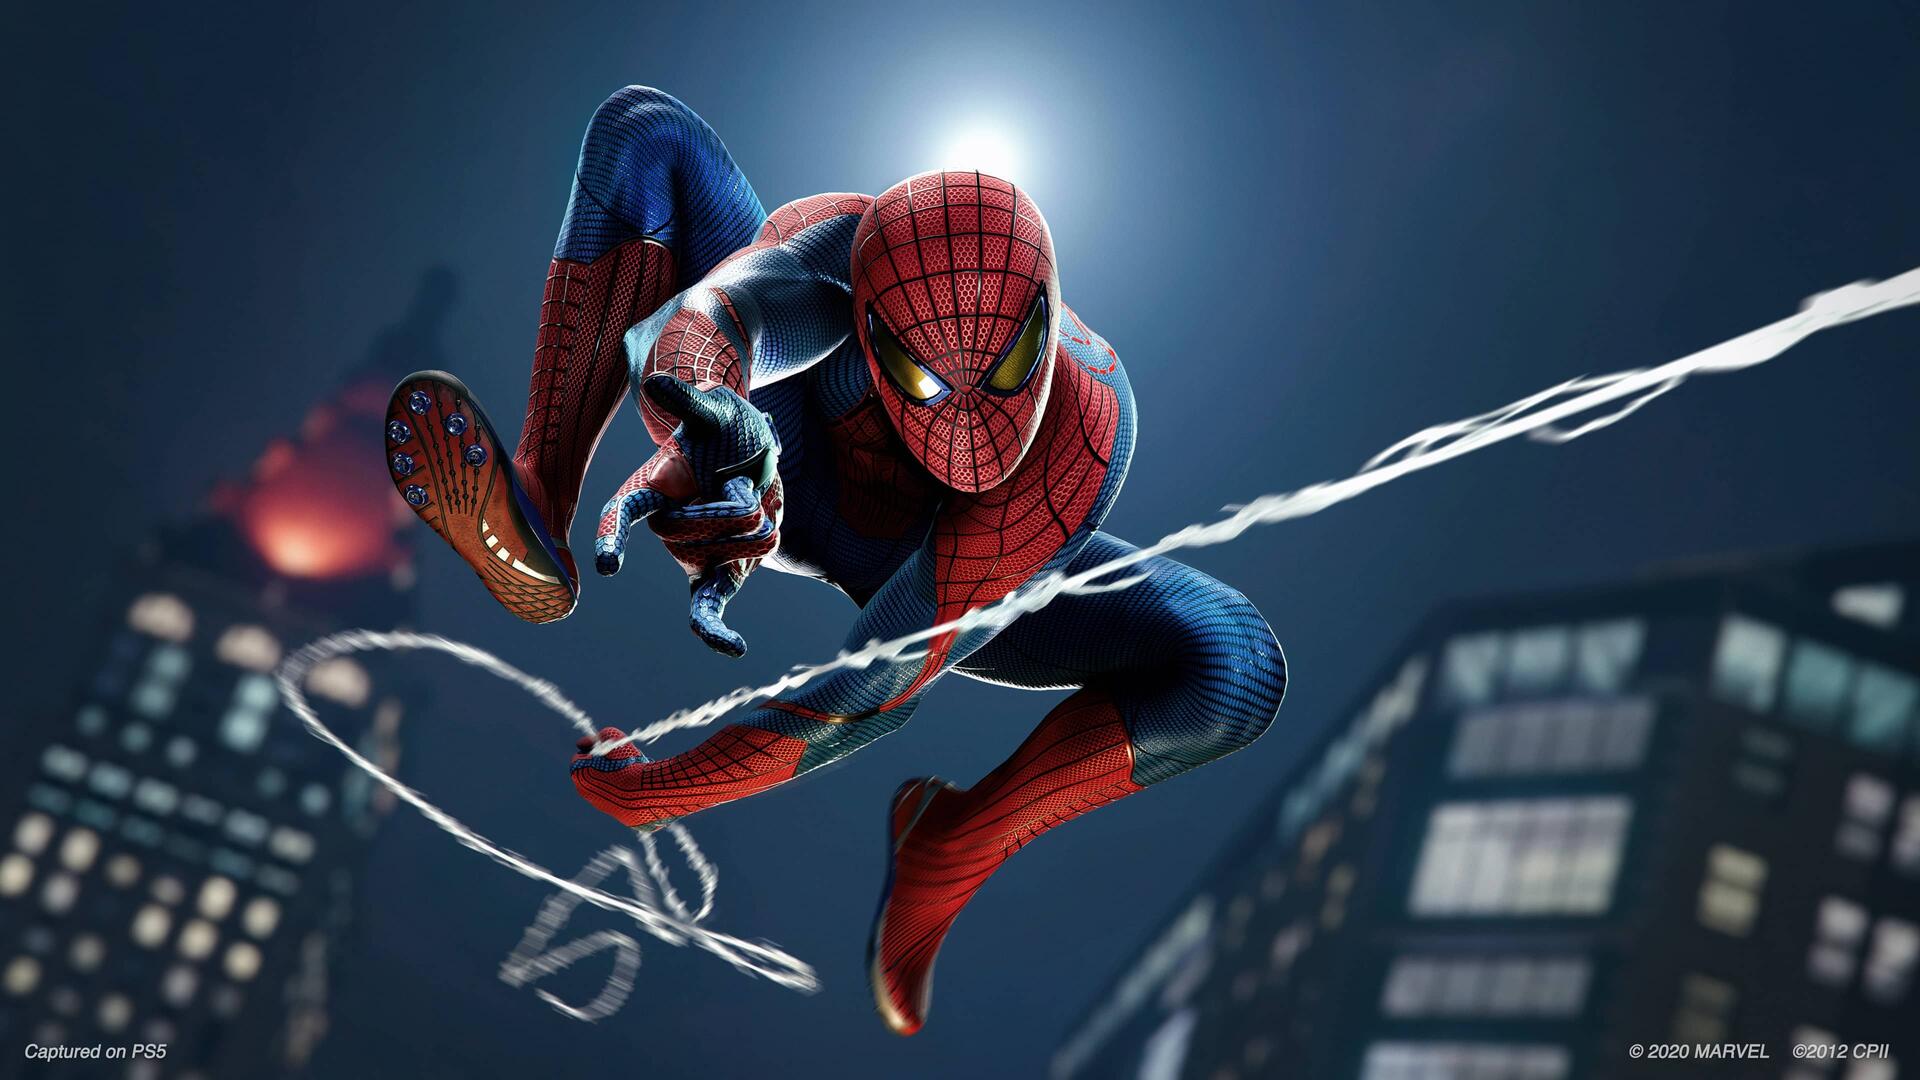 Marvel's Spider Man Remastered': First Look At The Game On PlayStation 5